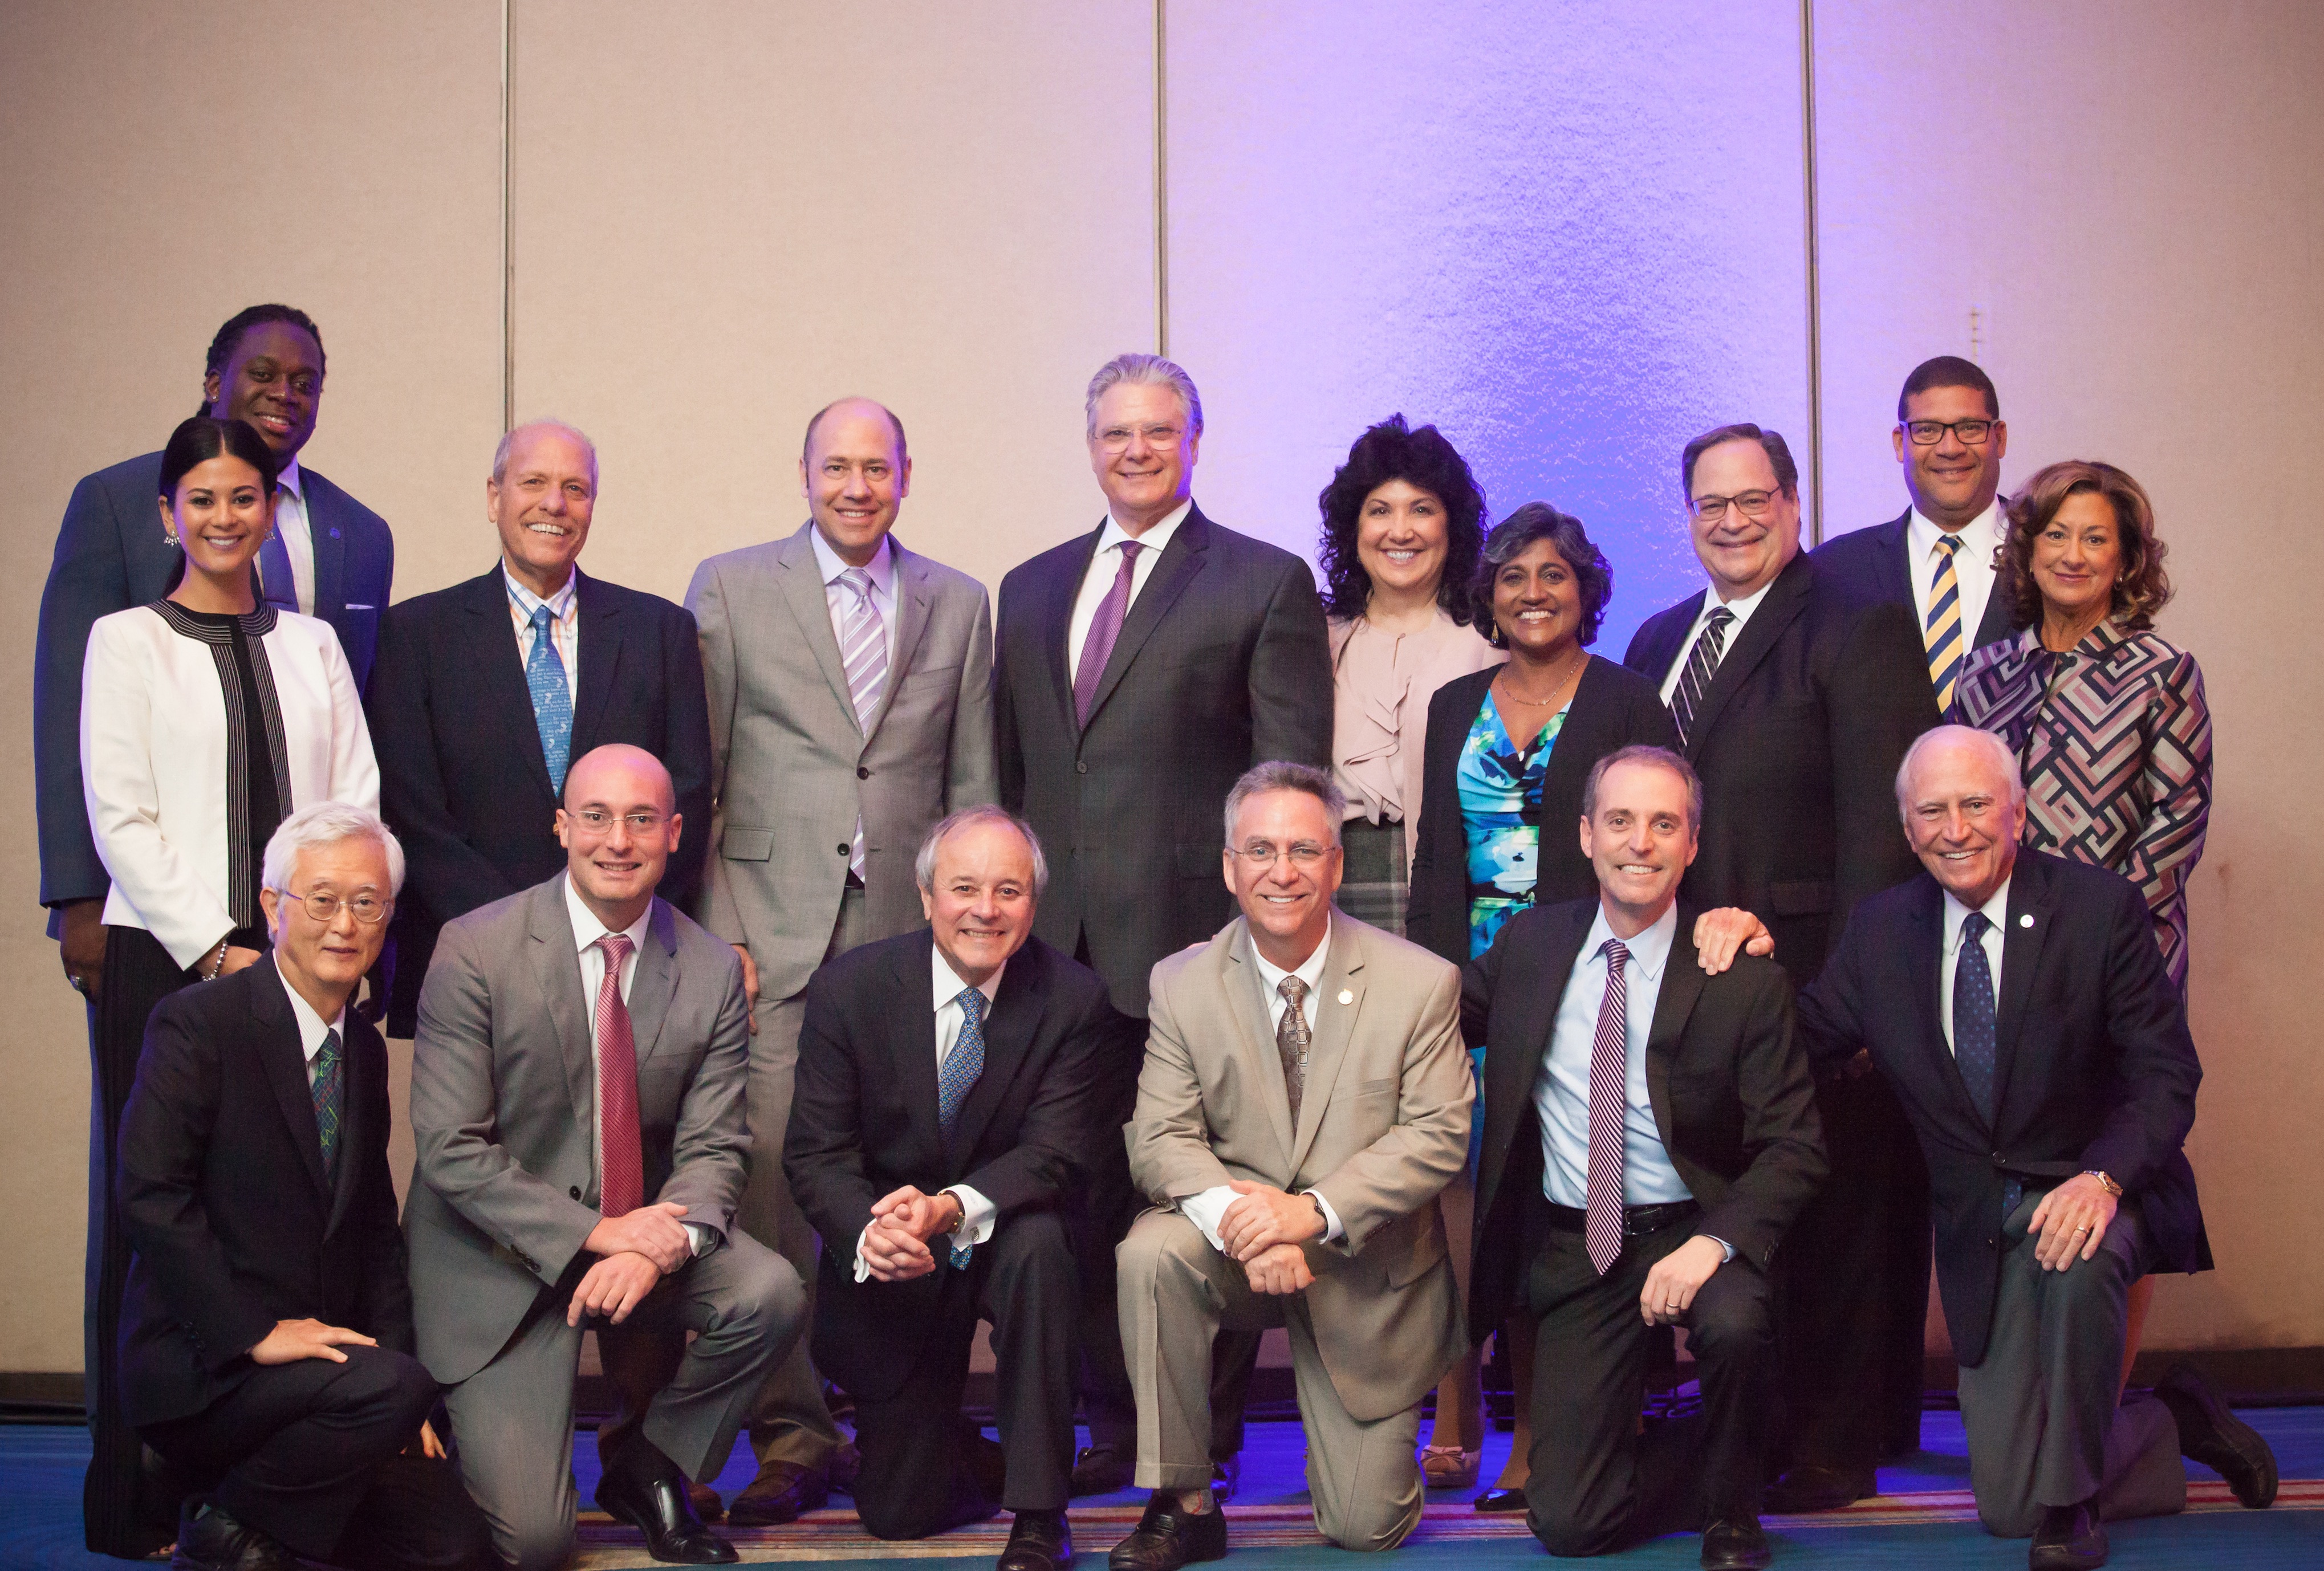 Memorial Healthcare System received three honors during this year's Florida Hospital Association's Celebration of Achievement in Quality and Service Awards held in Orlando recently.